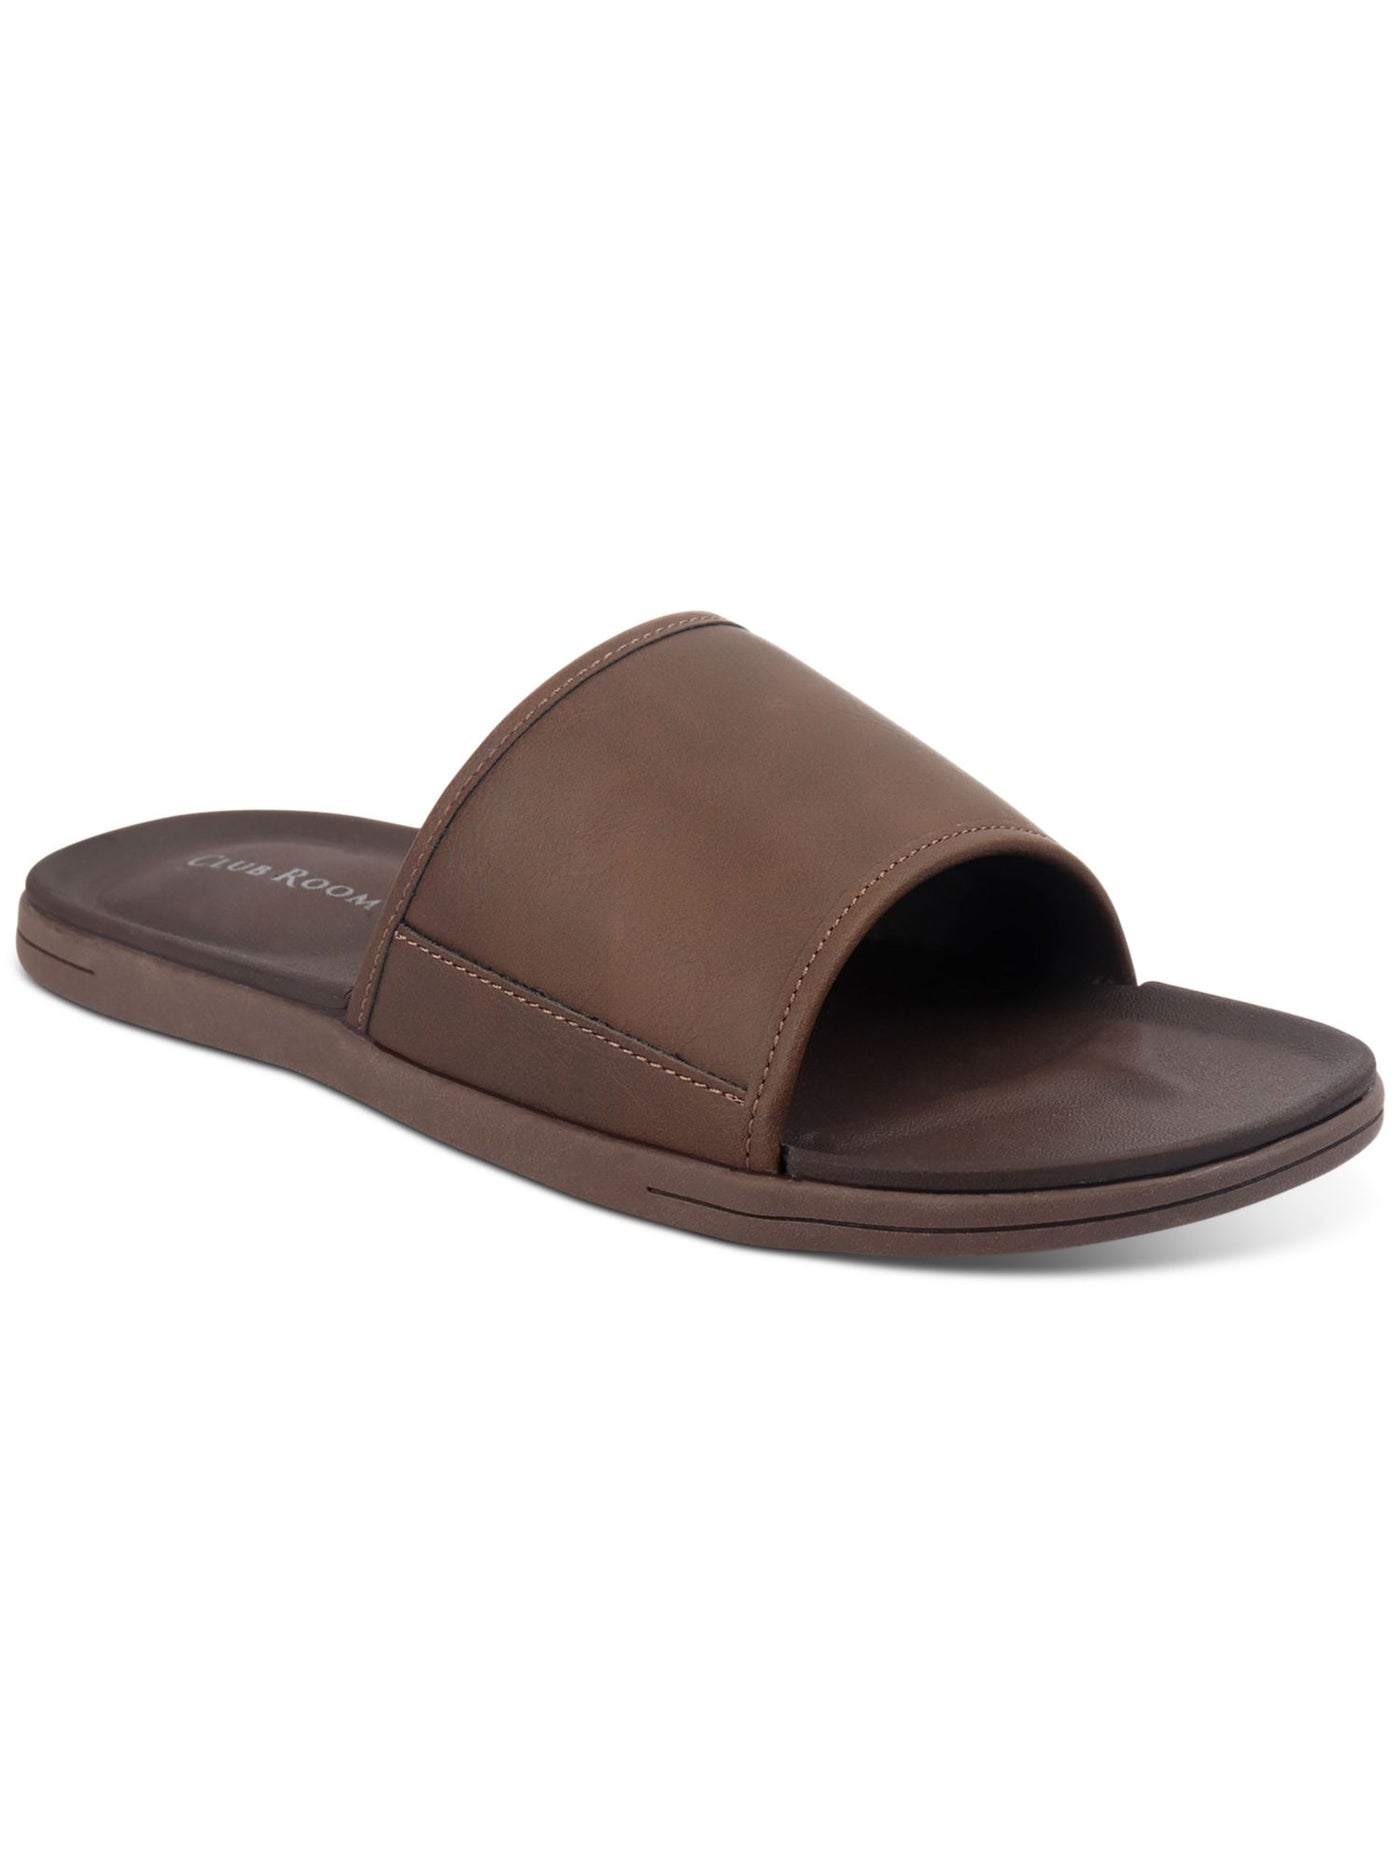 CLUBROOM Mens Brown Padded Arch Support Goring Cruz Round Toe Slip On Slide Sandals Shoes 11 M